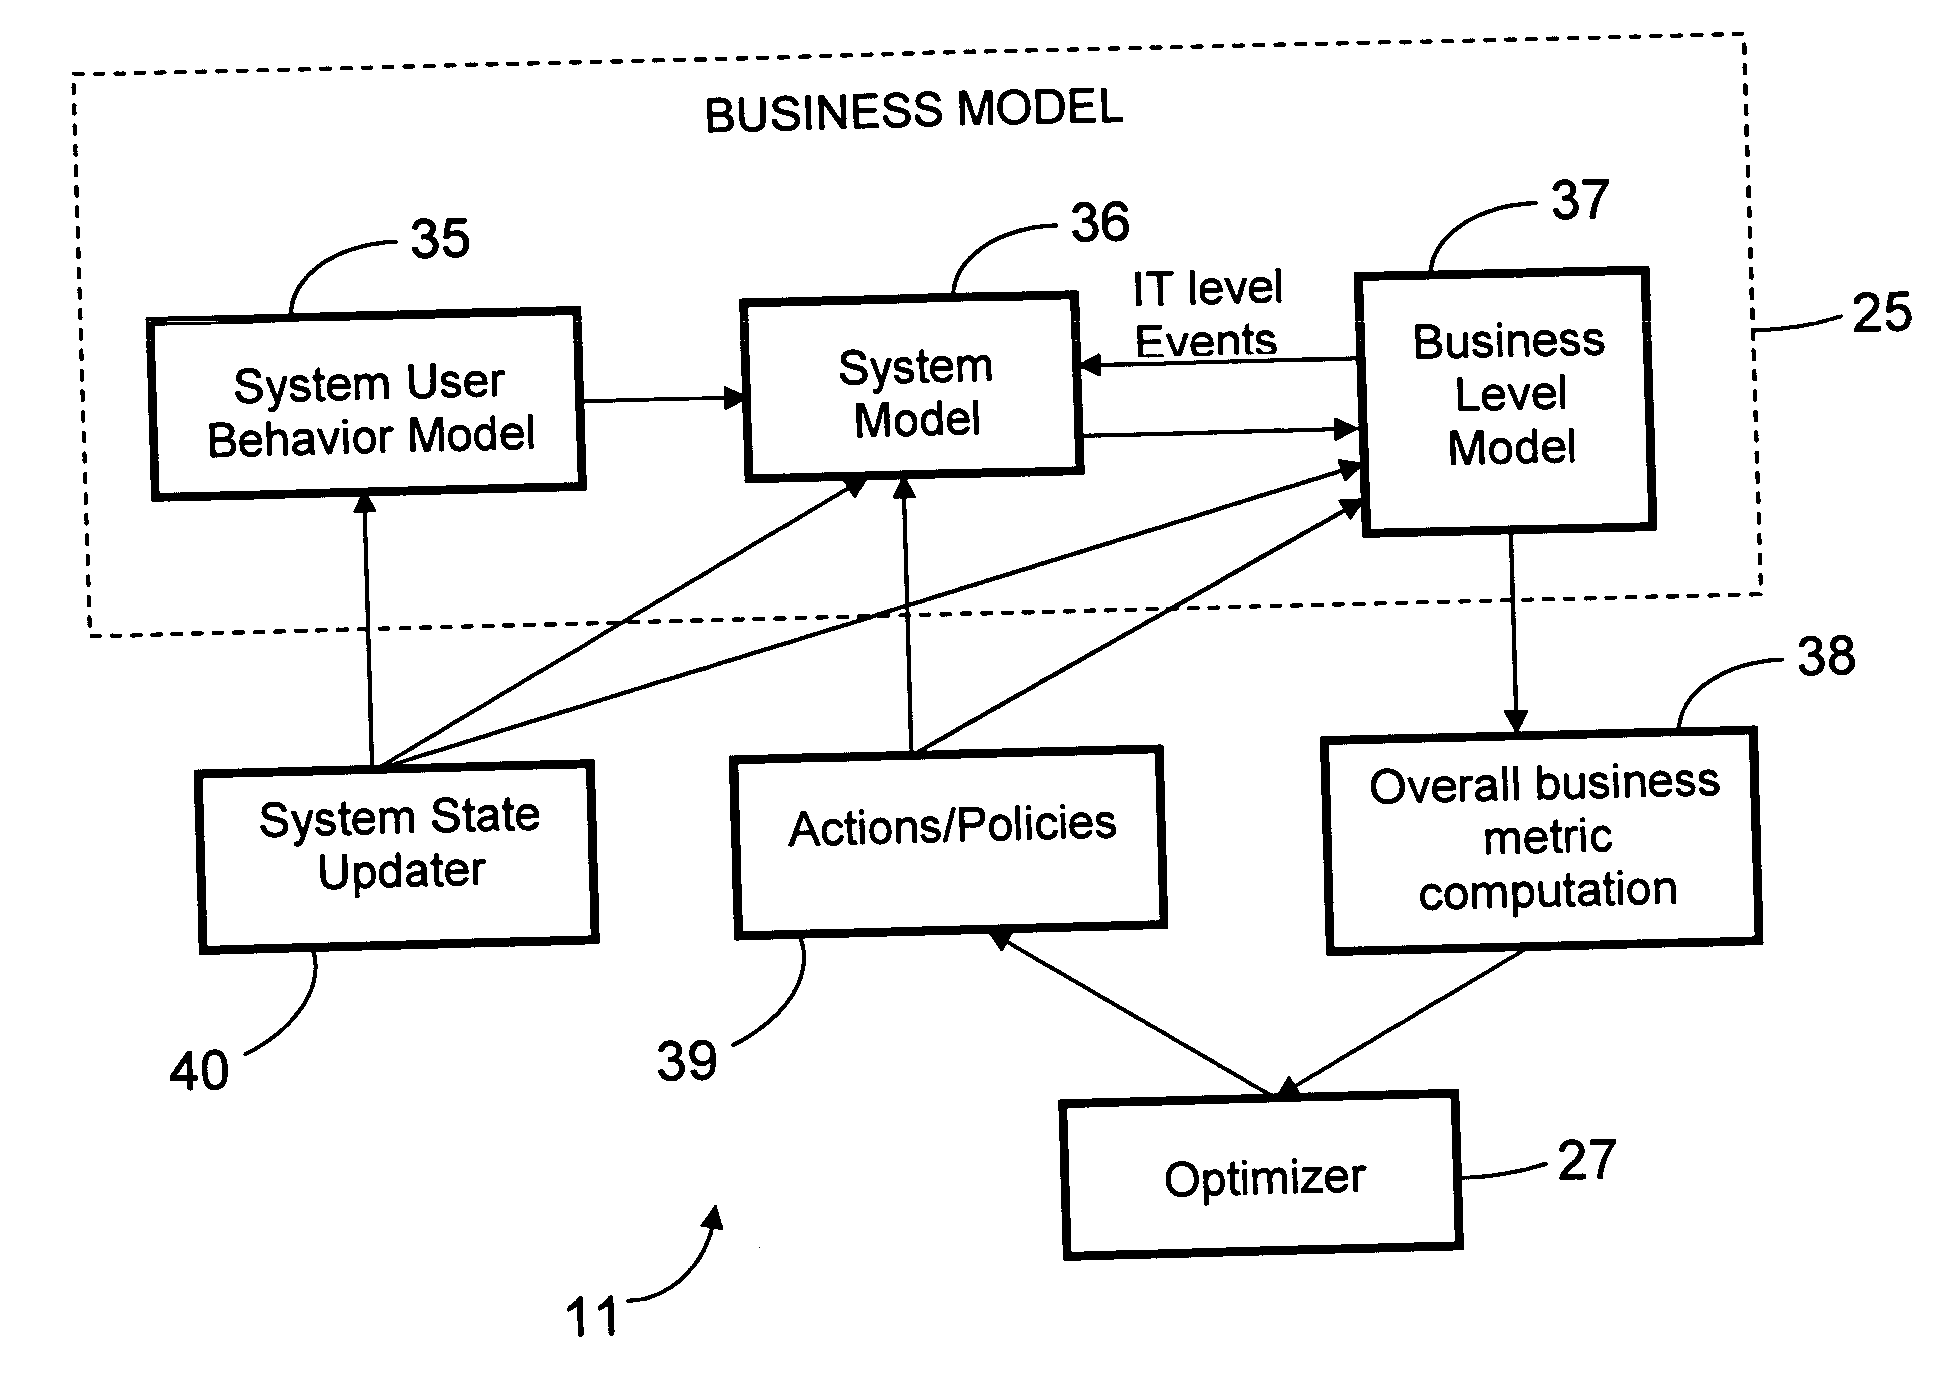 Method and system for automatic continuous monitoring and on-demand optimization of business IT infrastructure according to business objectives